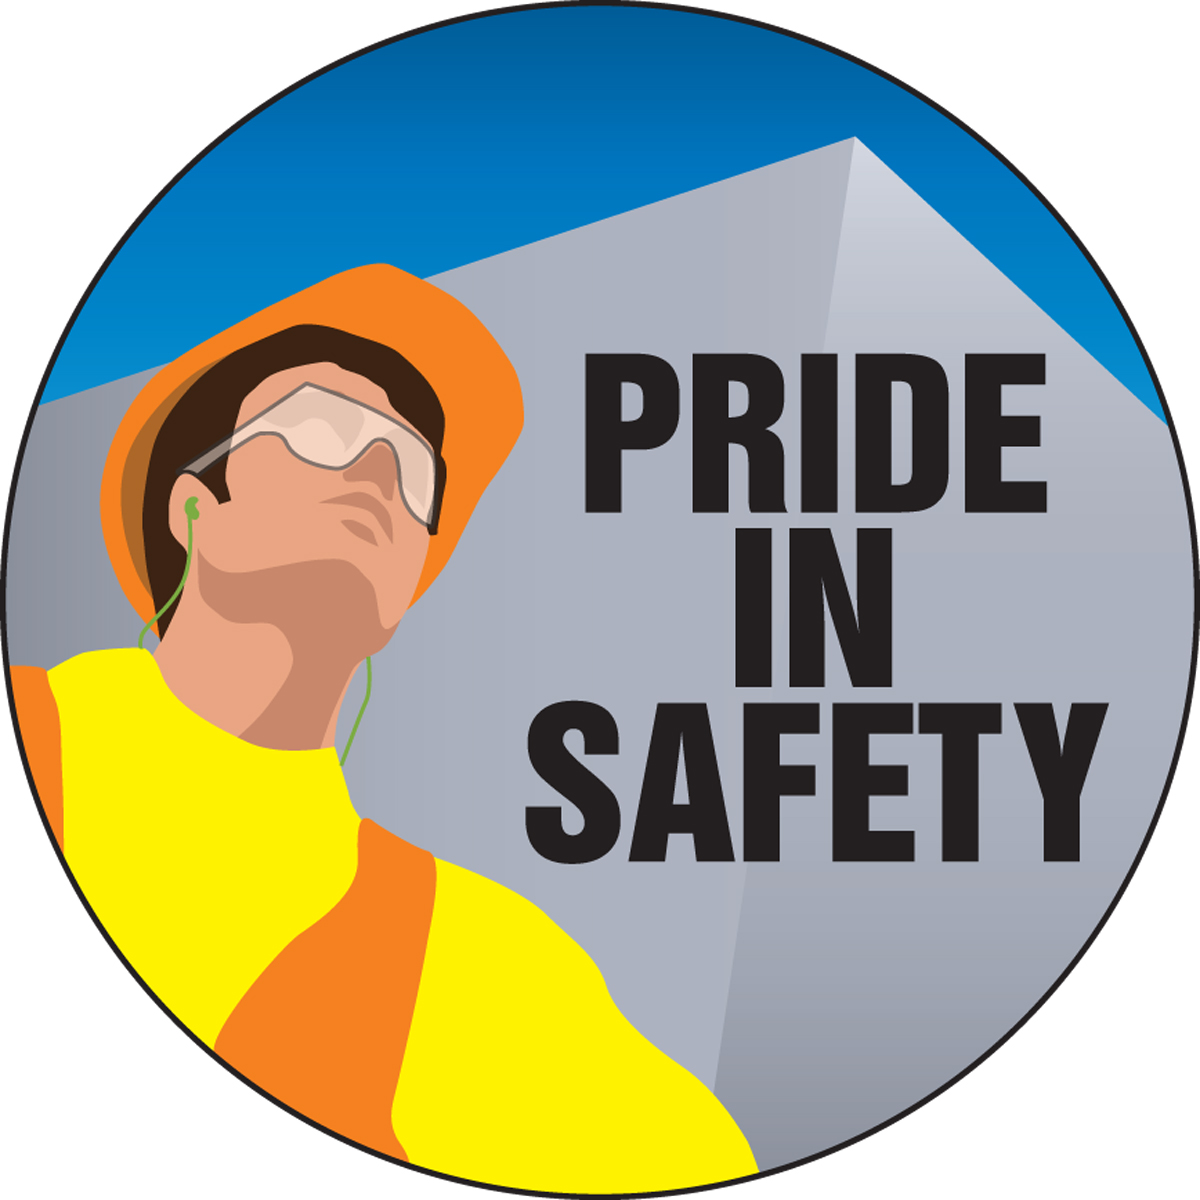 PRIDE IN SAFETY